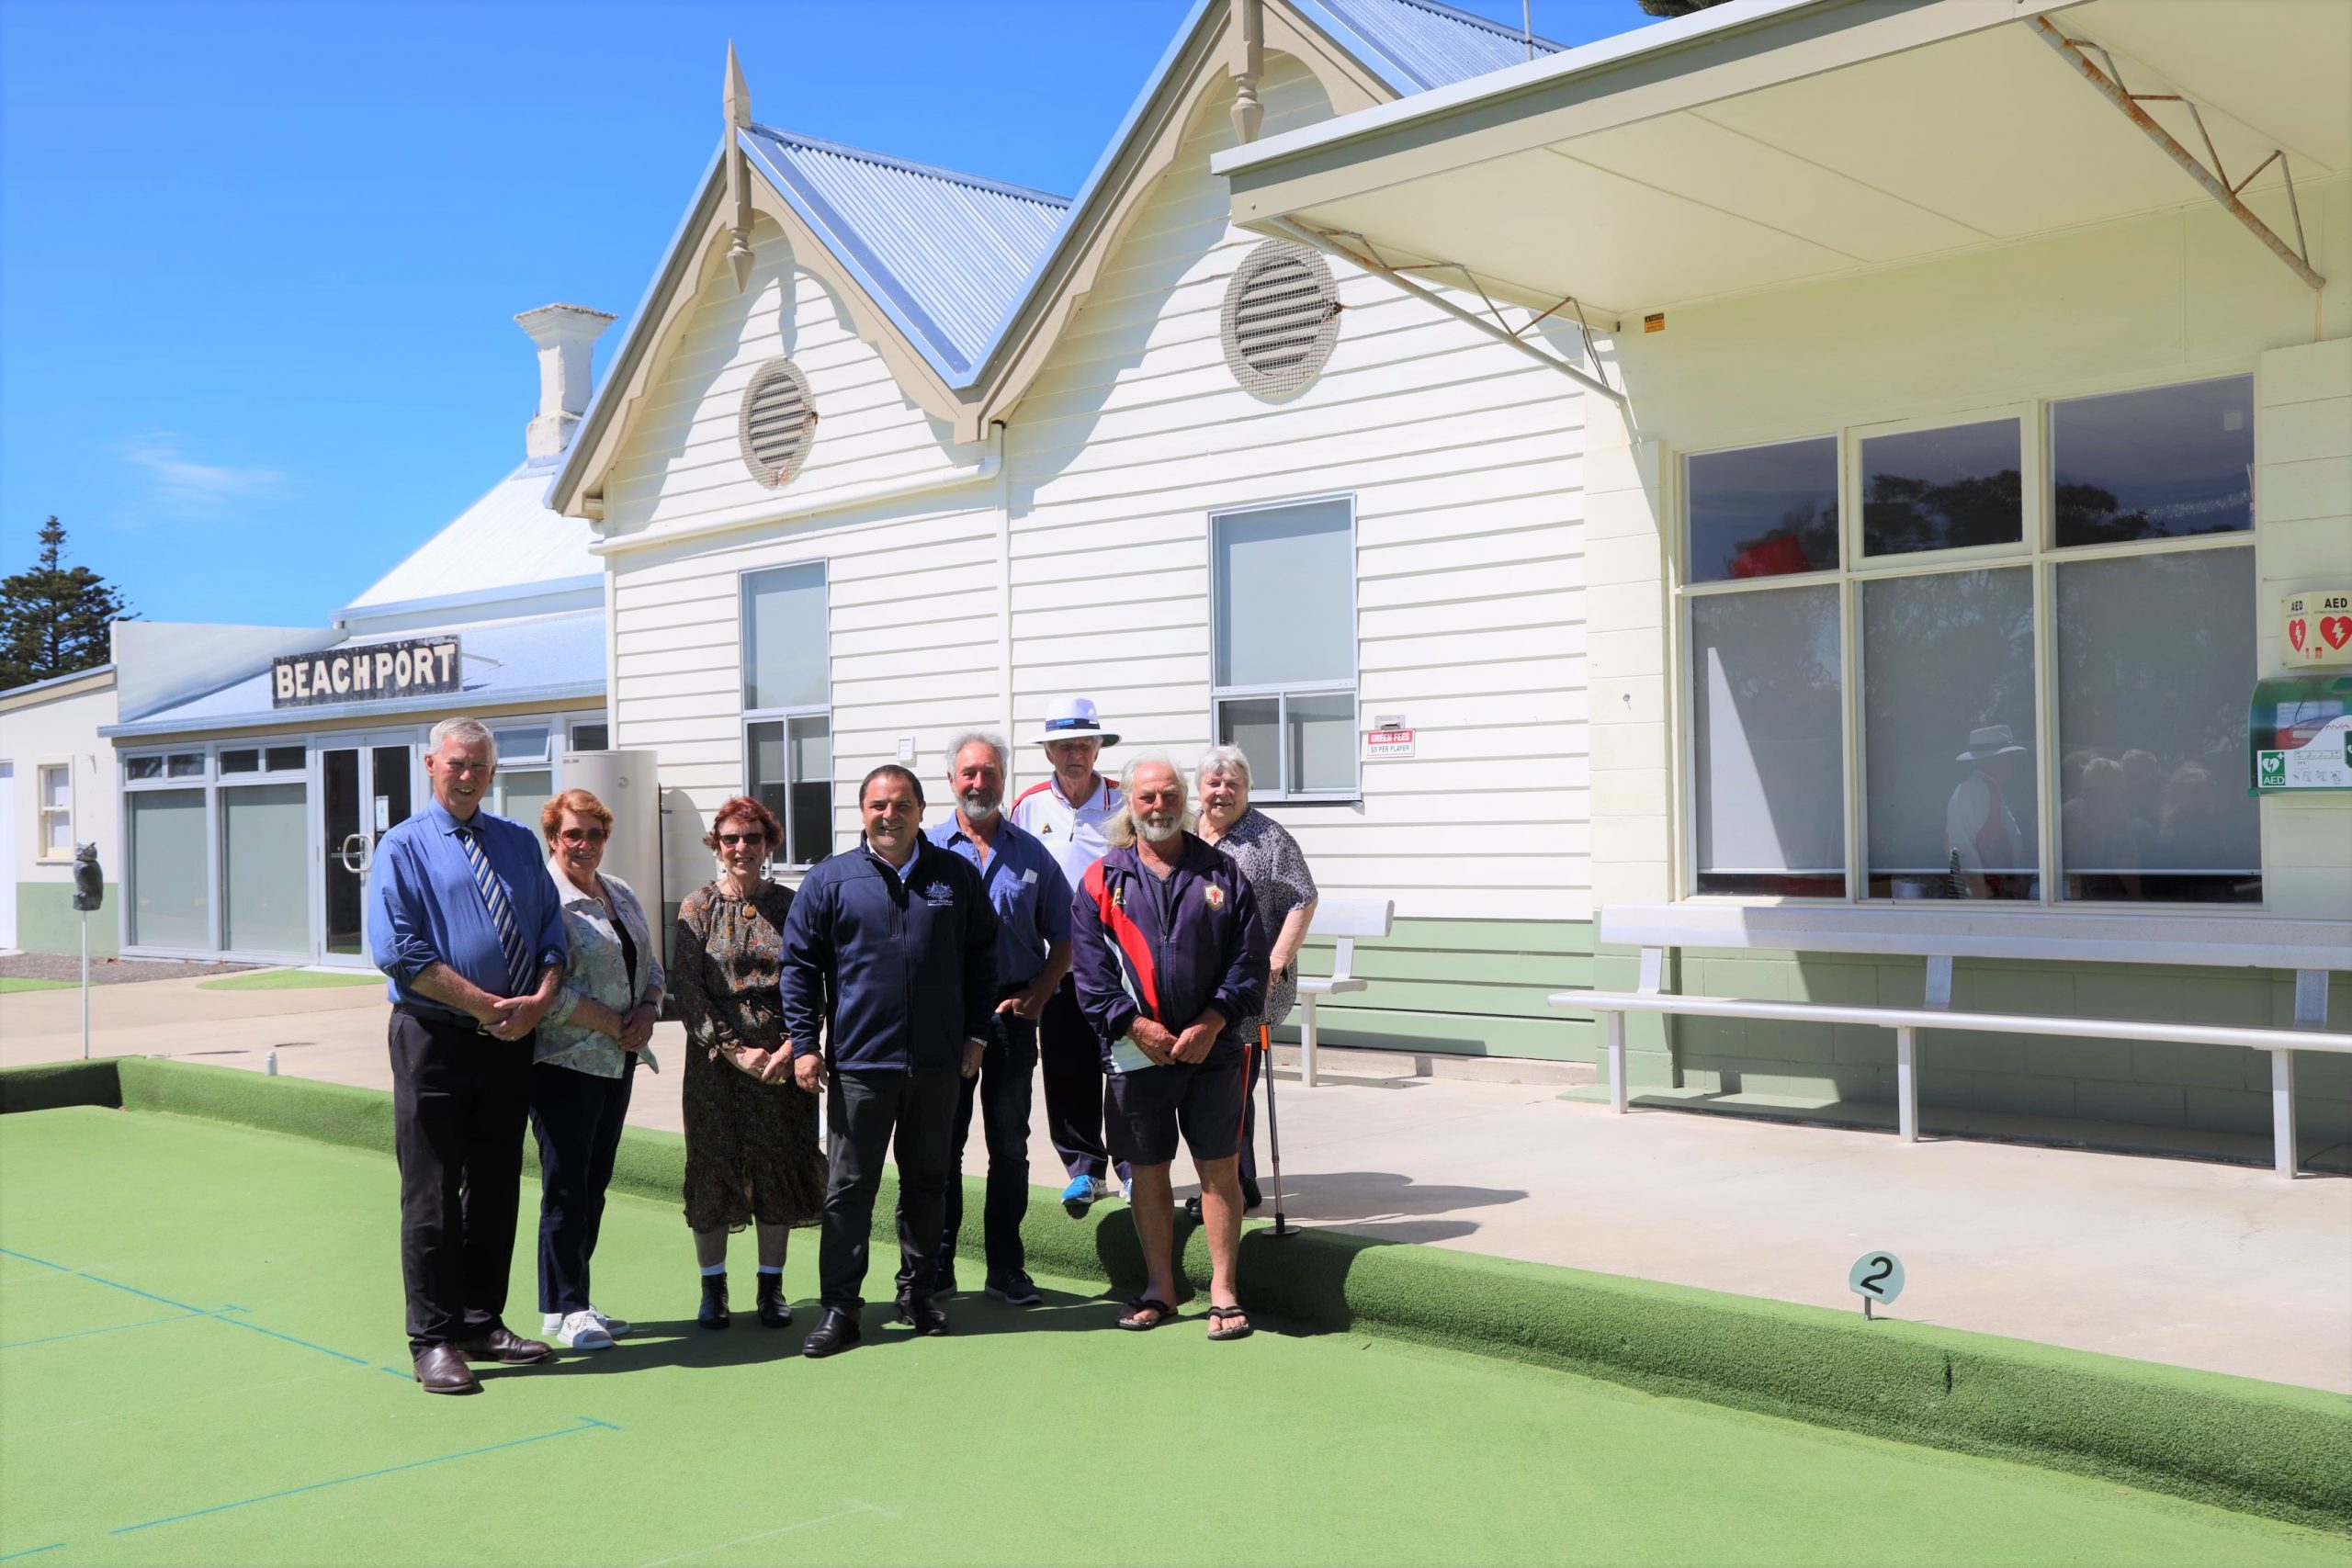 BEACHPORT BOWLING CLUB OFFICIALLY OPEN